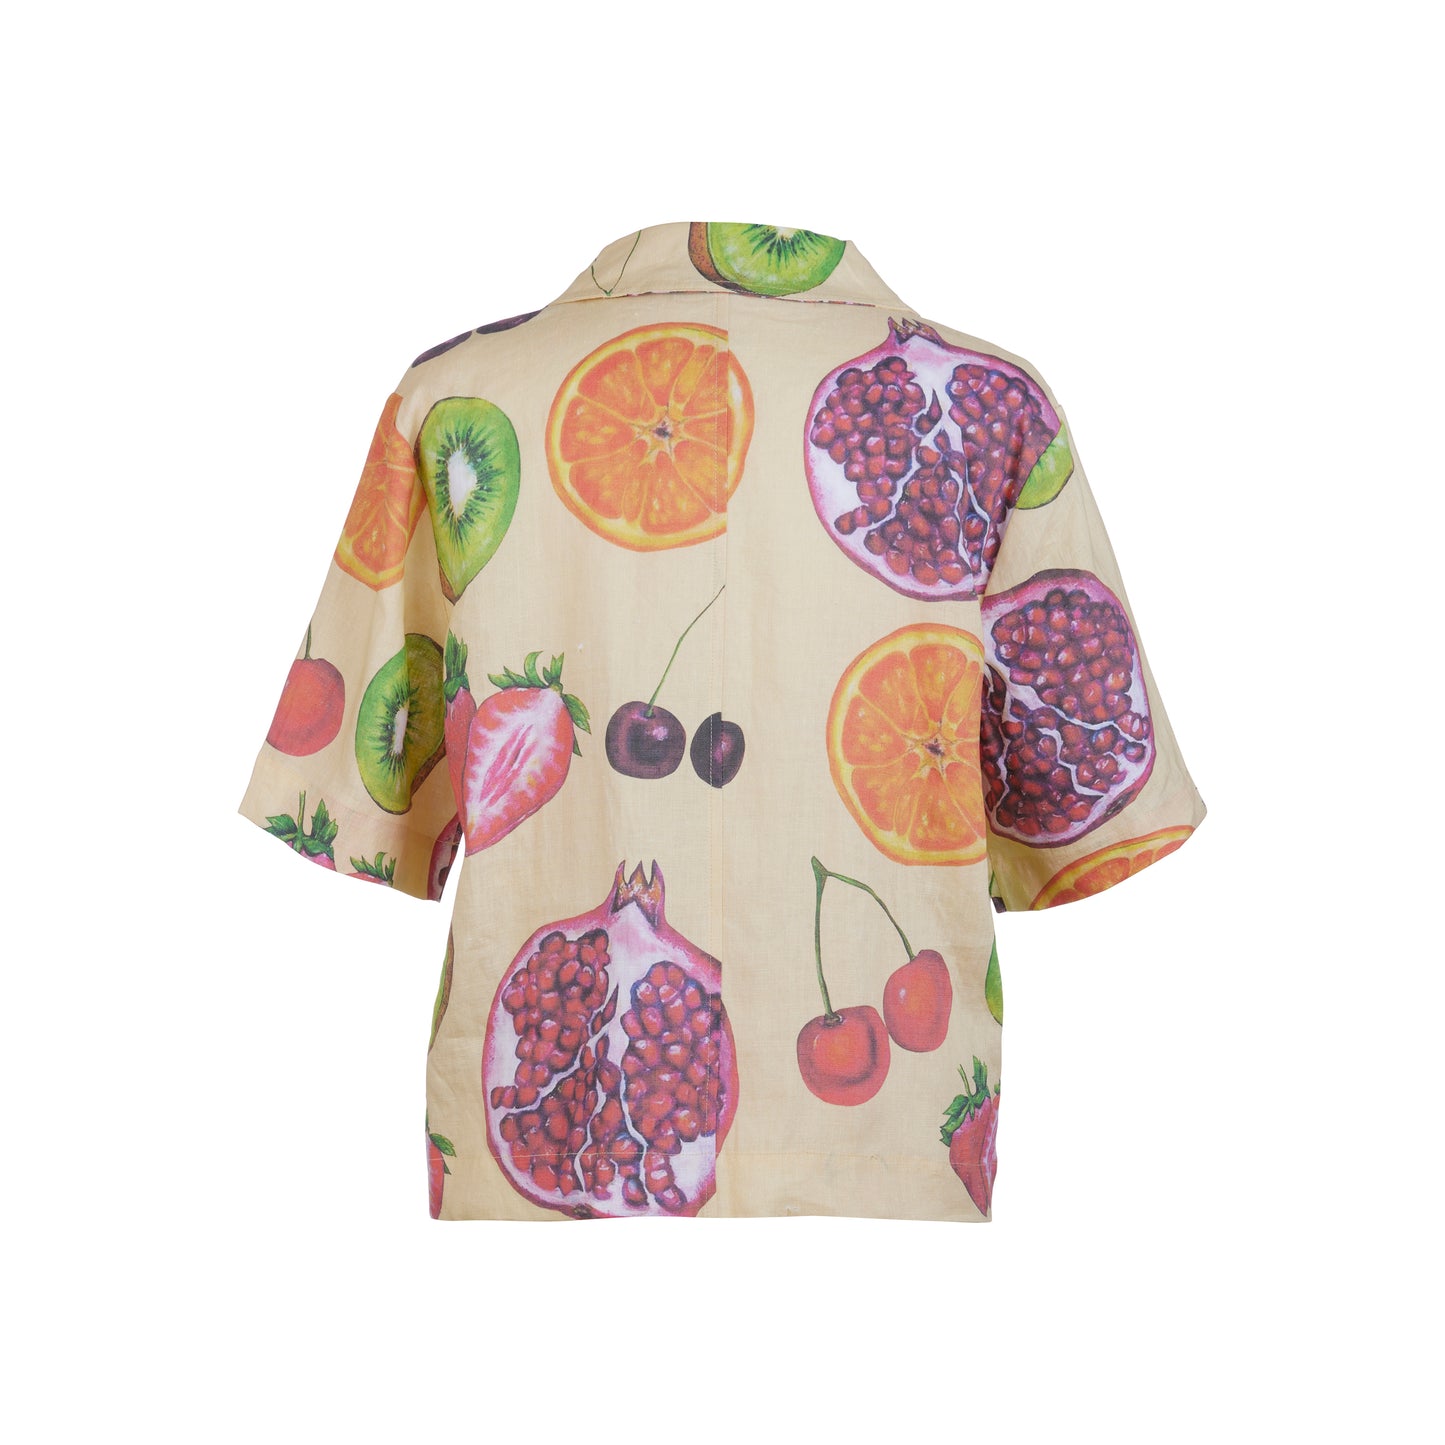 Picnic Button Up